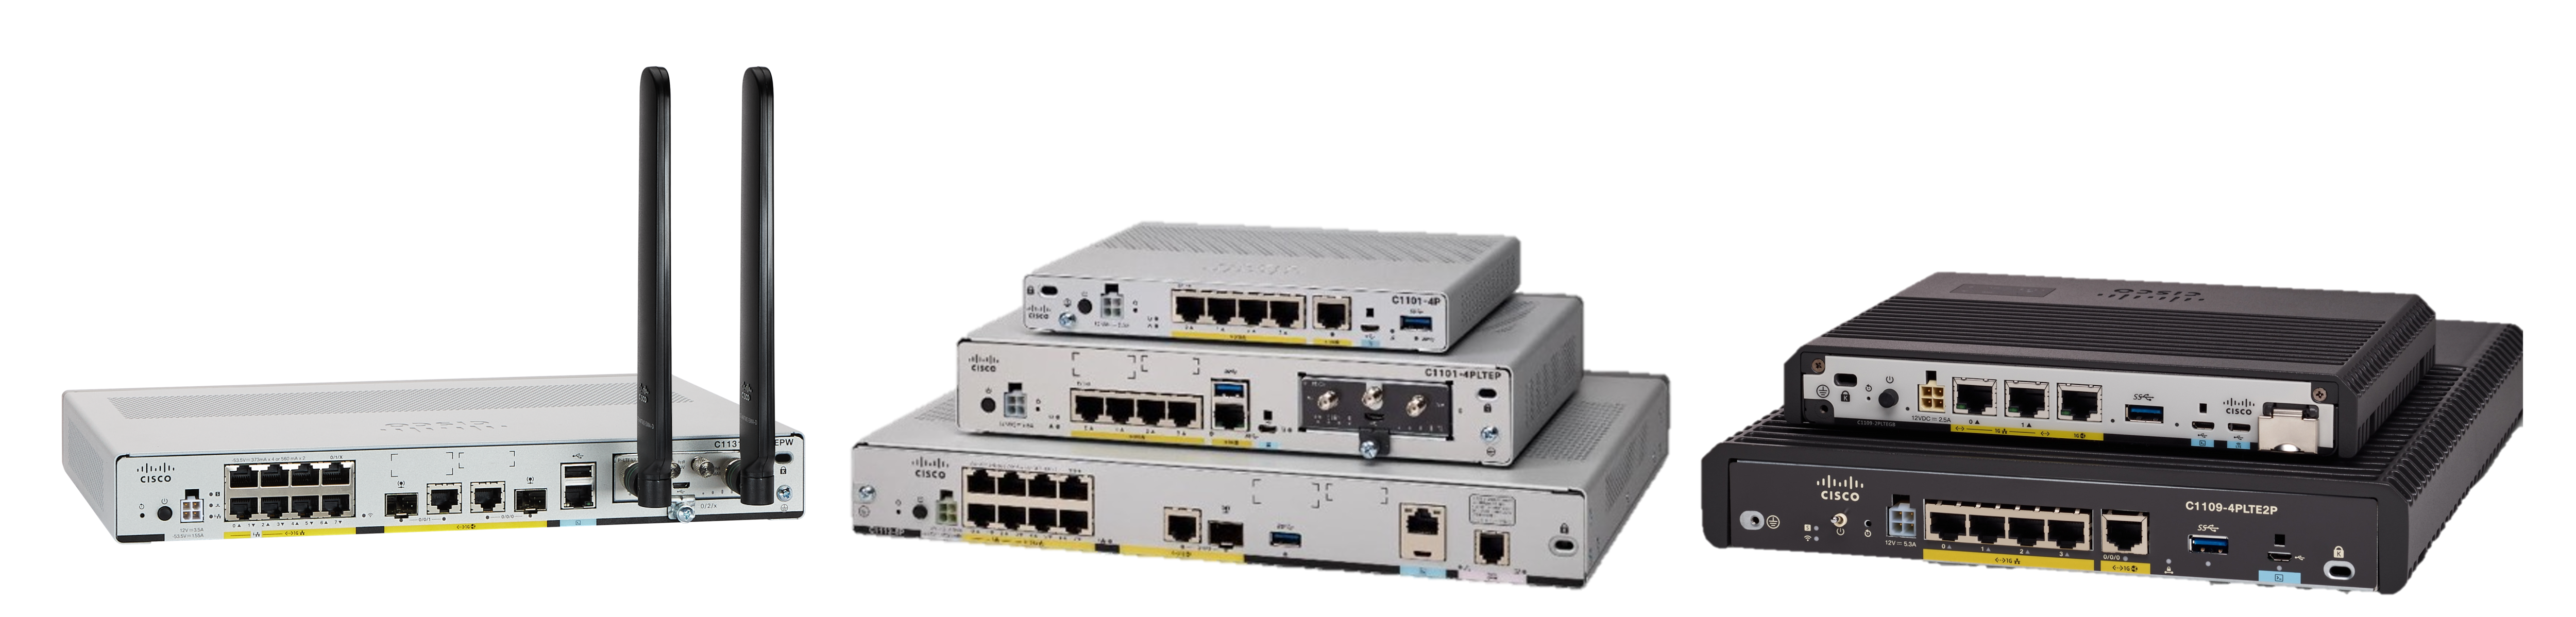 Cisco 1000 Product Family Series